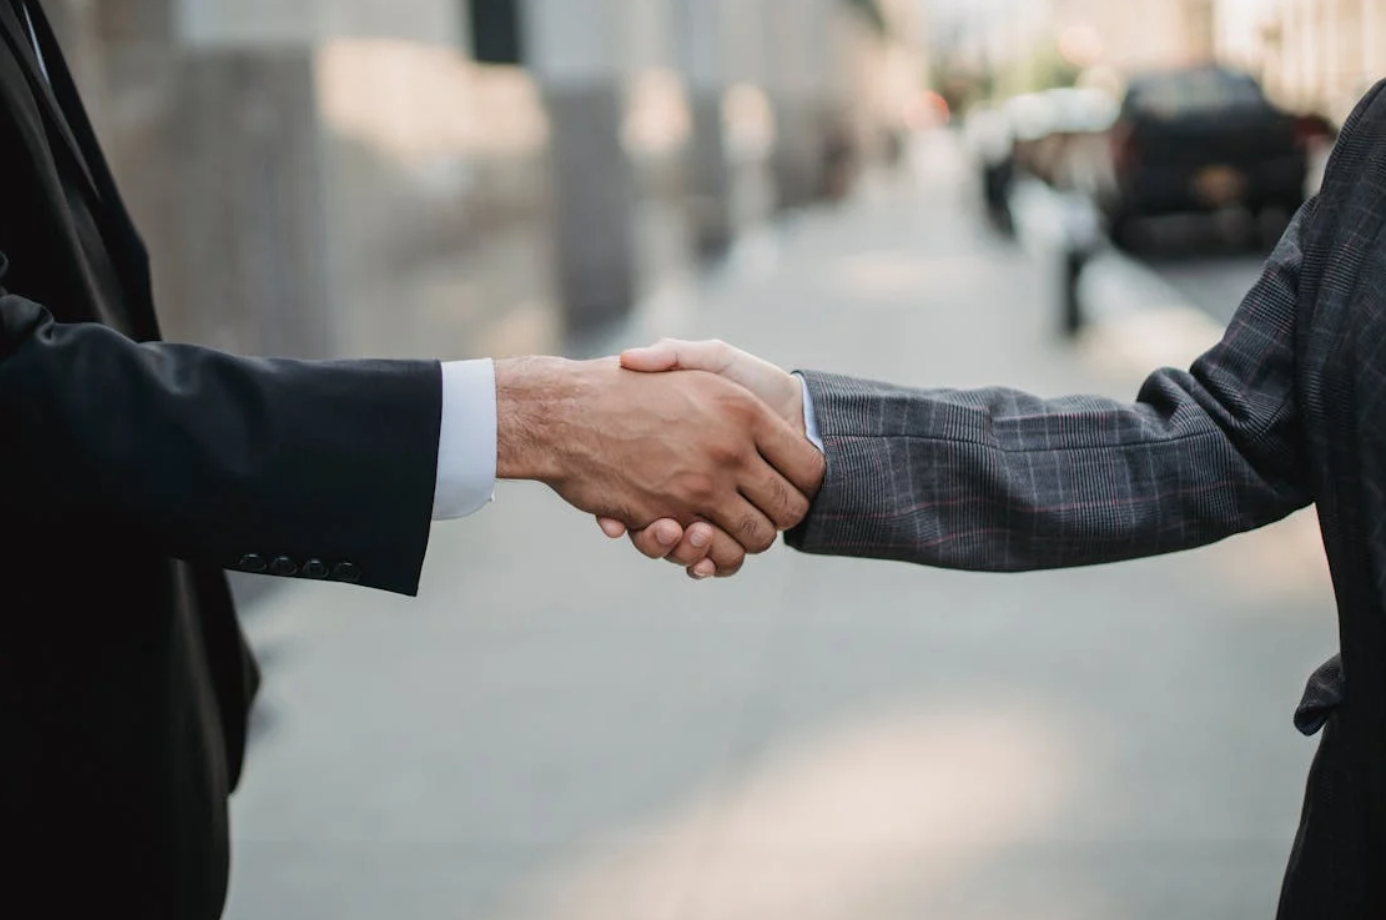 Two men in suits shaking hands; image by Ketut Subiyanto, via Pexels.com.